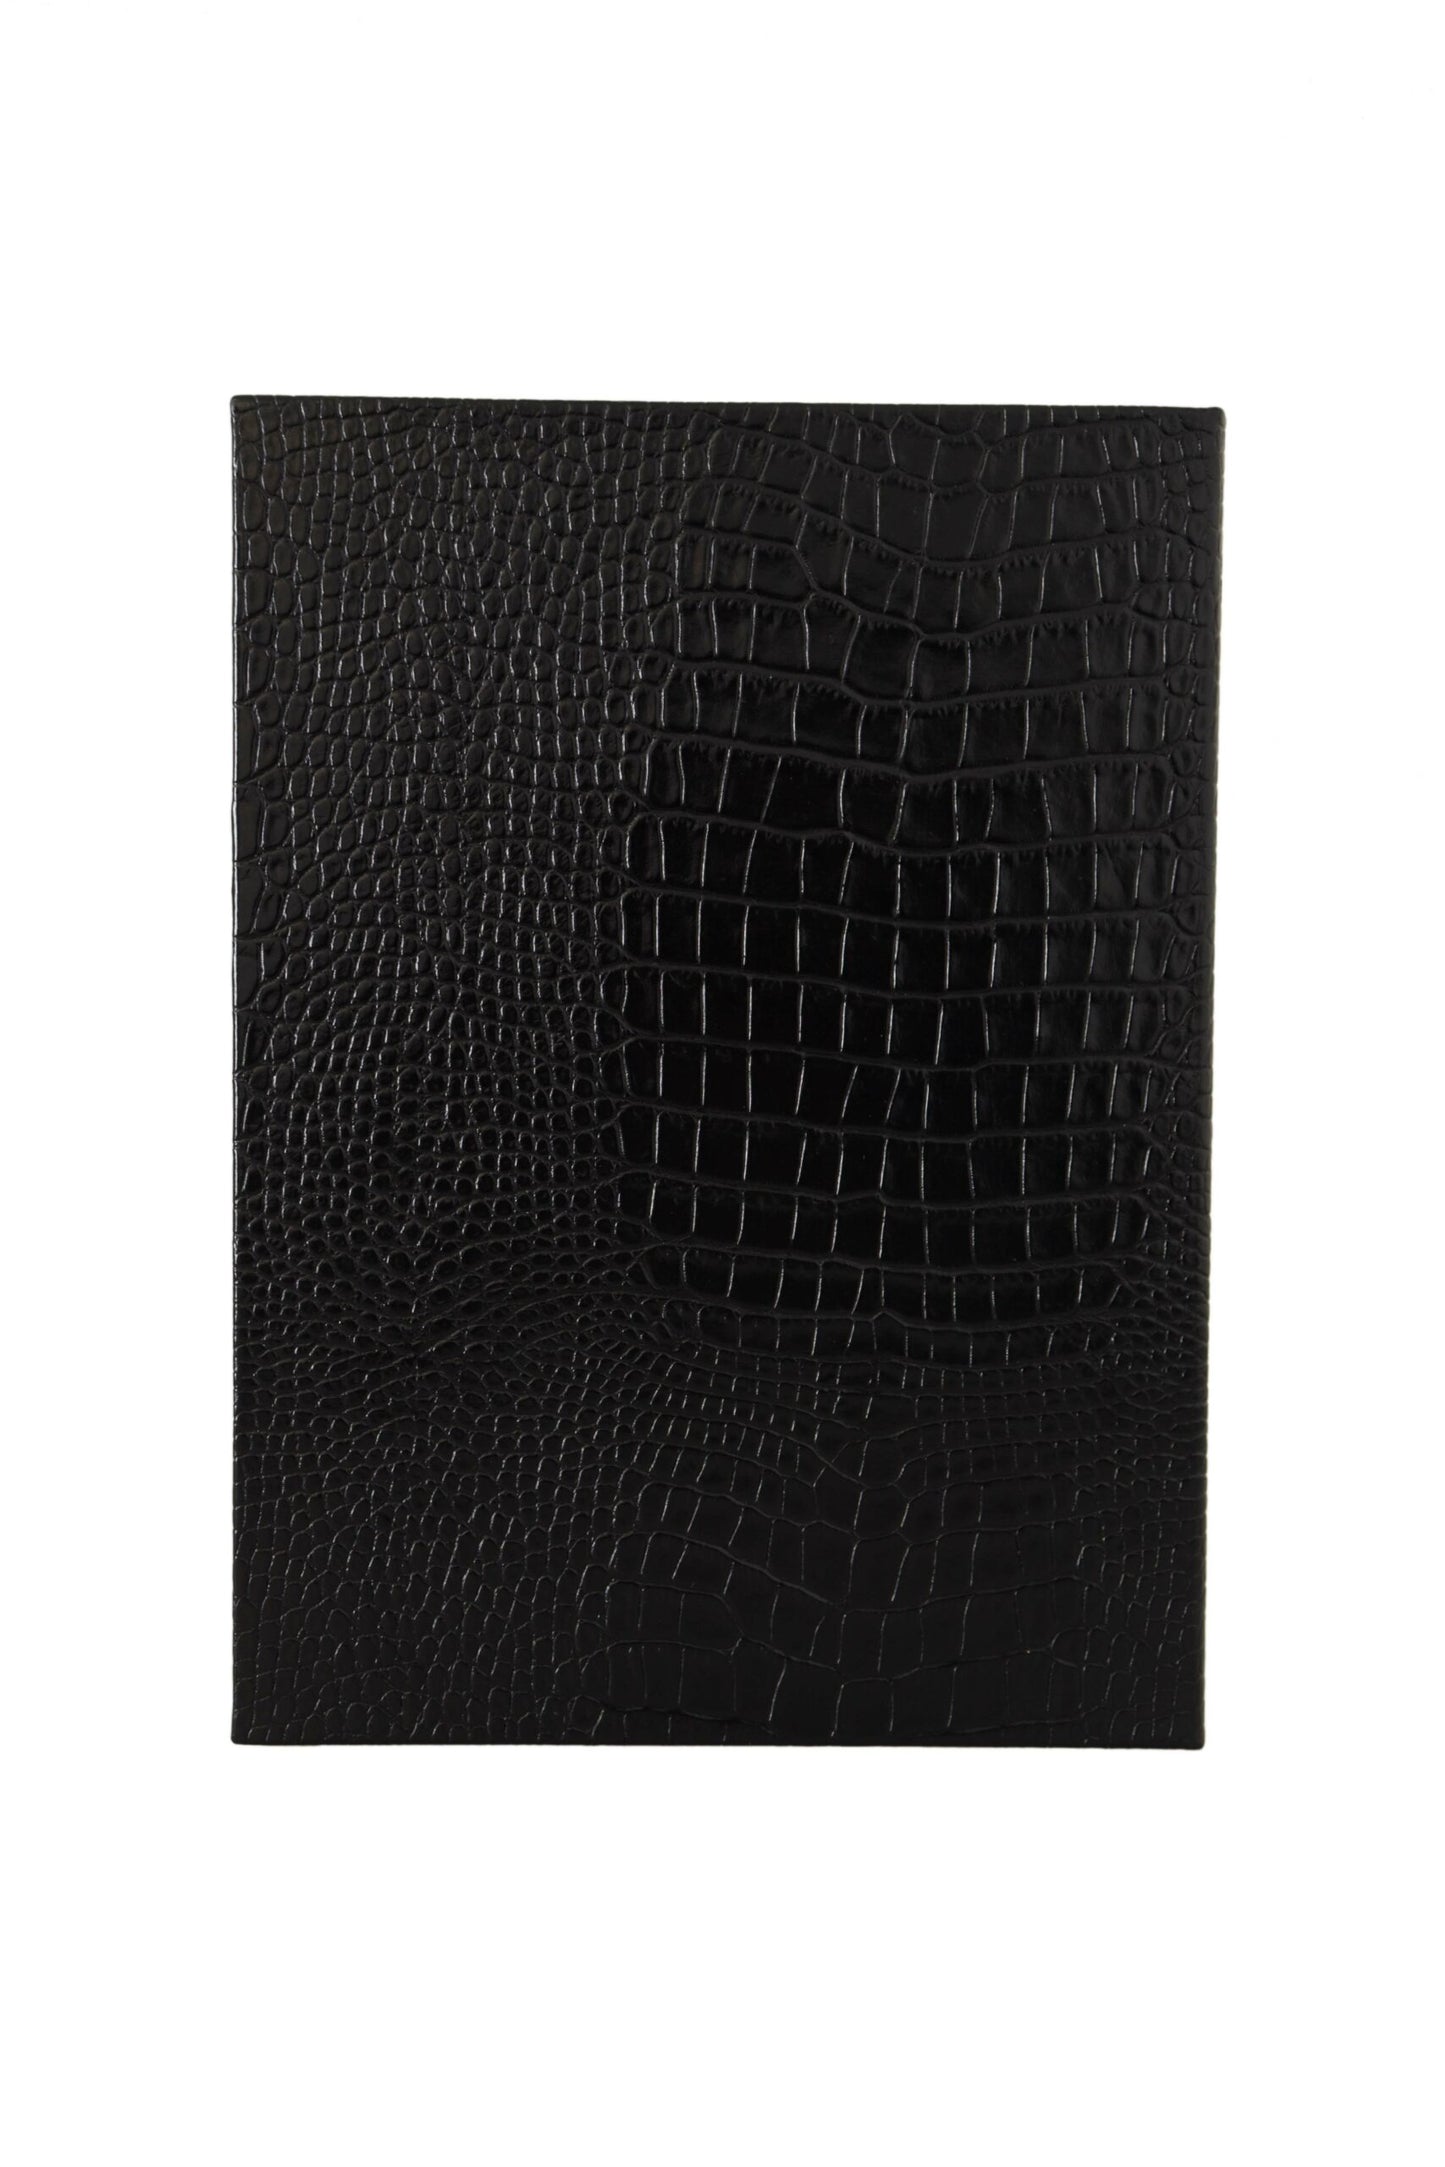 Black Leather Booklet Decor Mens Case Catalogue Folding Book - Designed by Dolce & Gabbana Available to Buy at a Discounted Price on Moon Behind The Hill Online Designer Discount Store